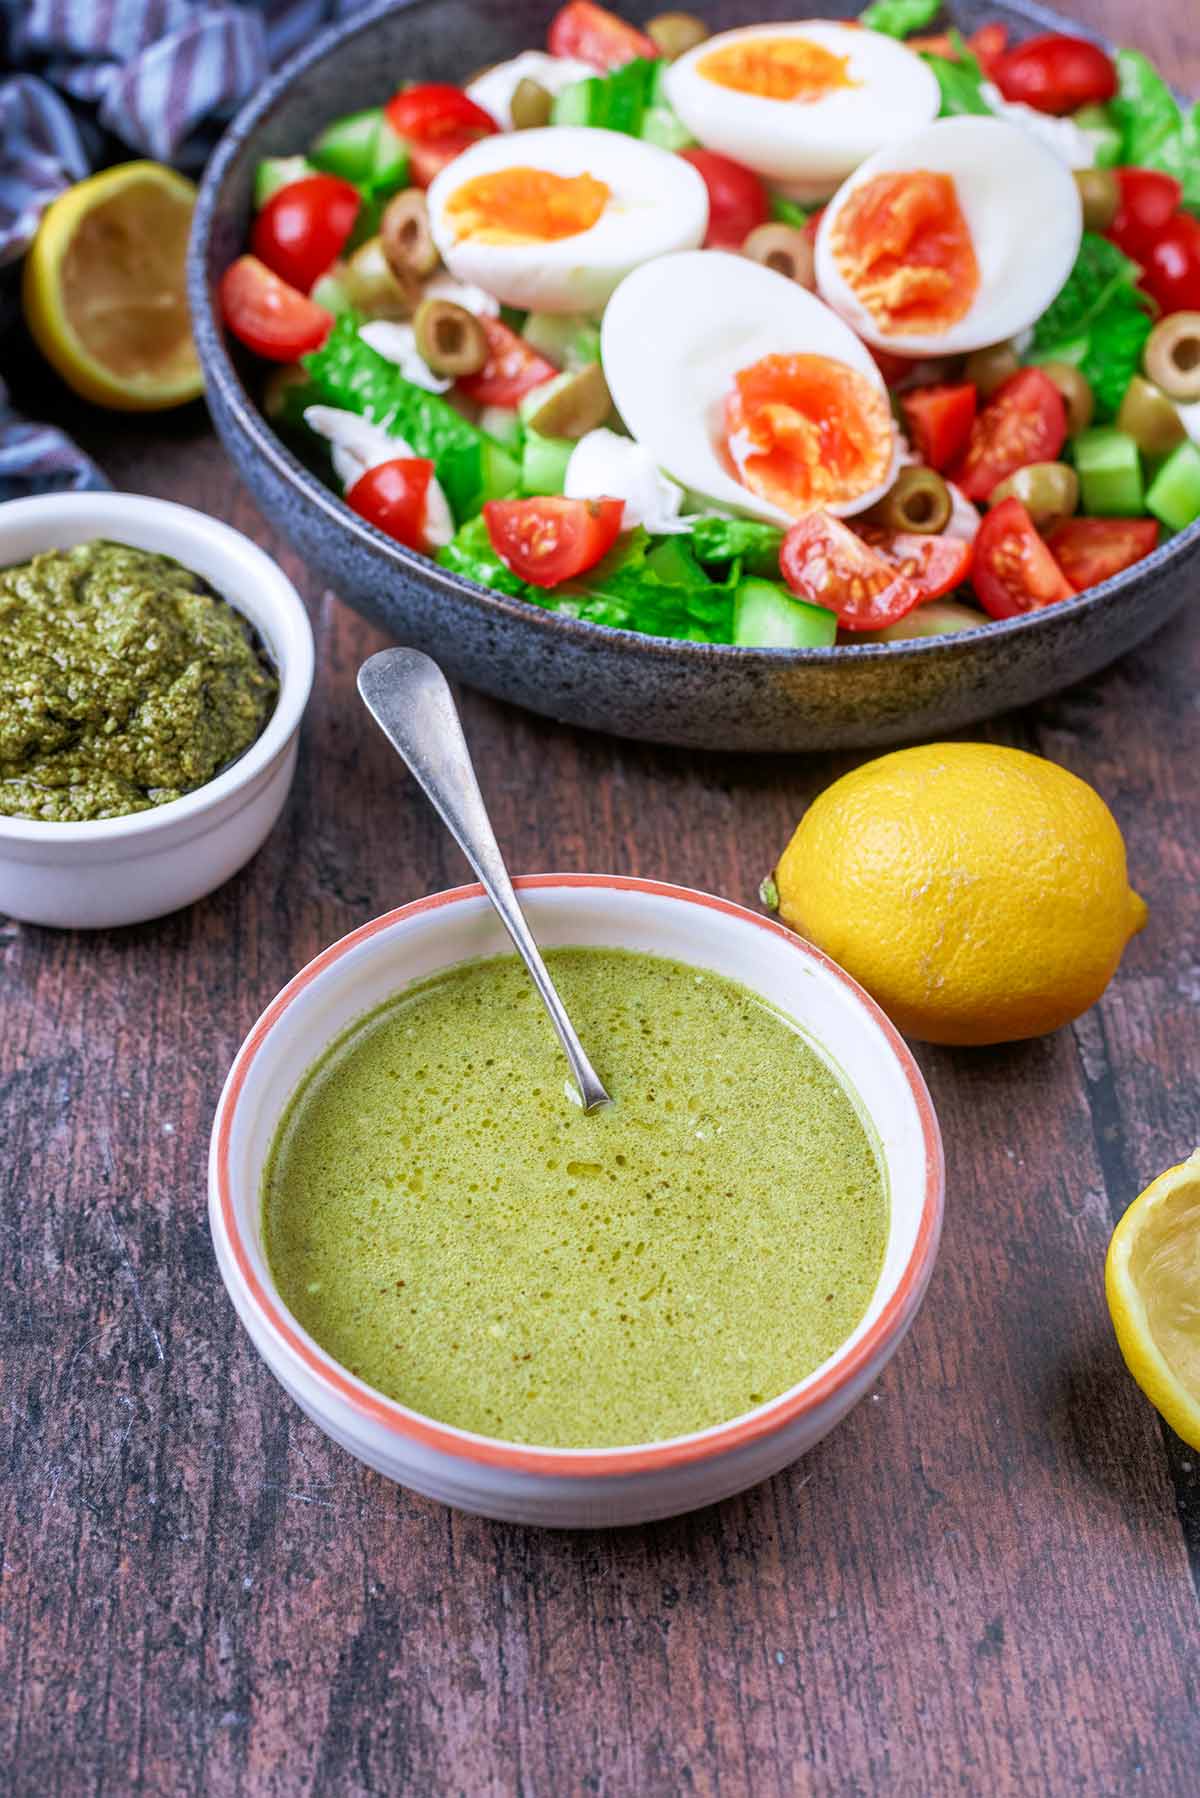 A bowl of green pesto dressing in front of a bowl of egg salad.